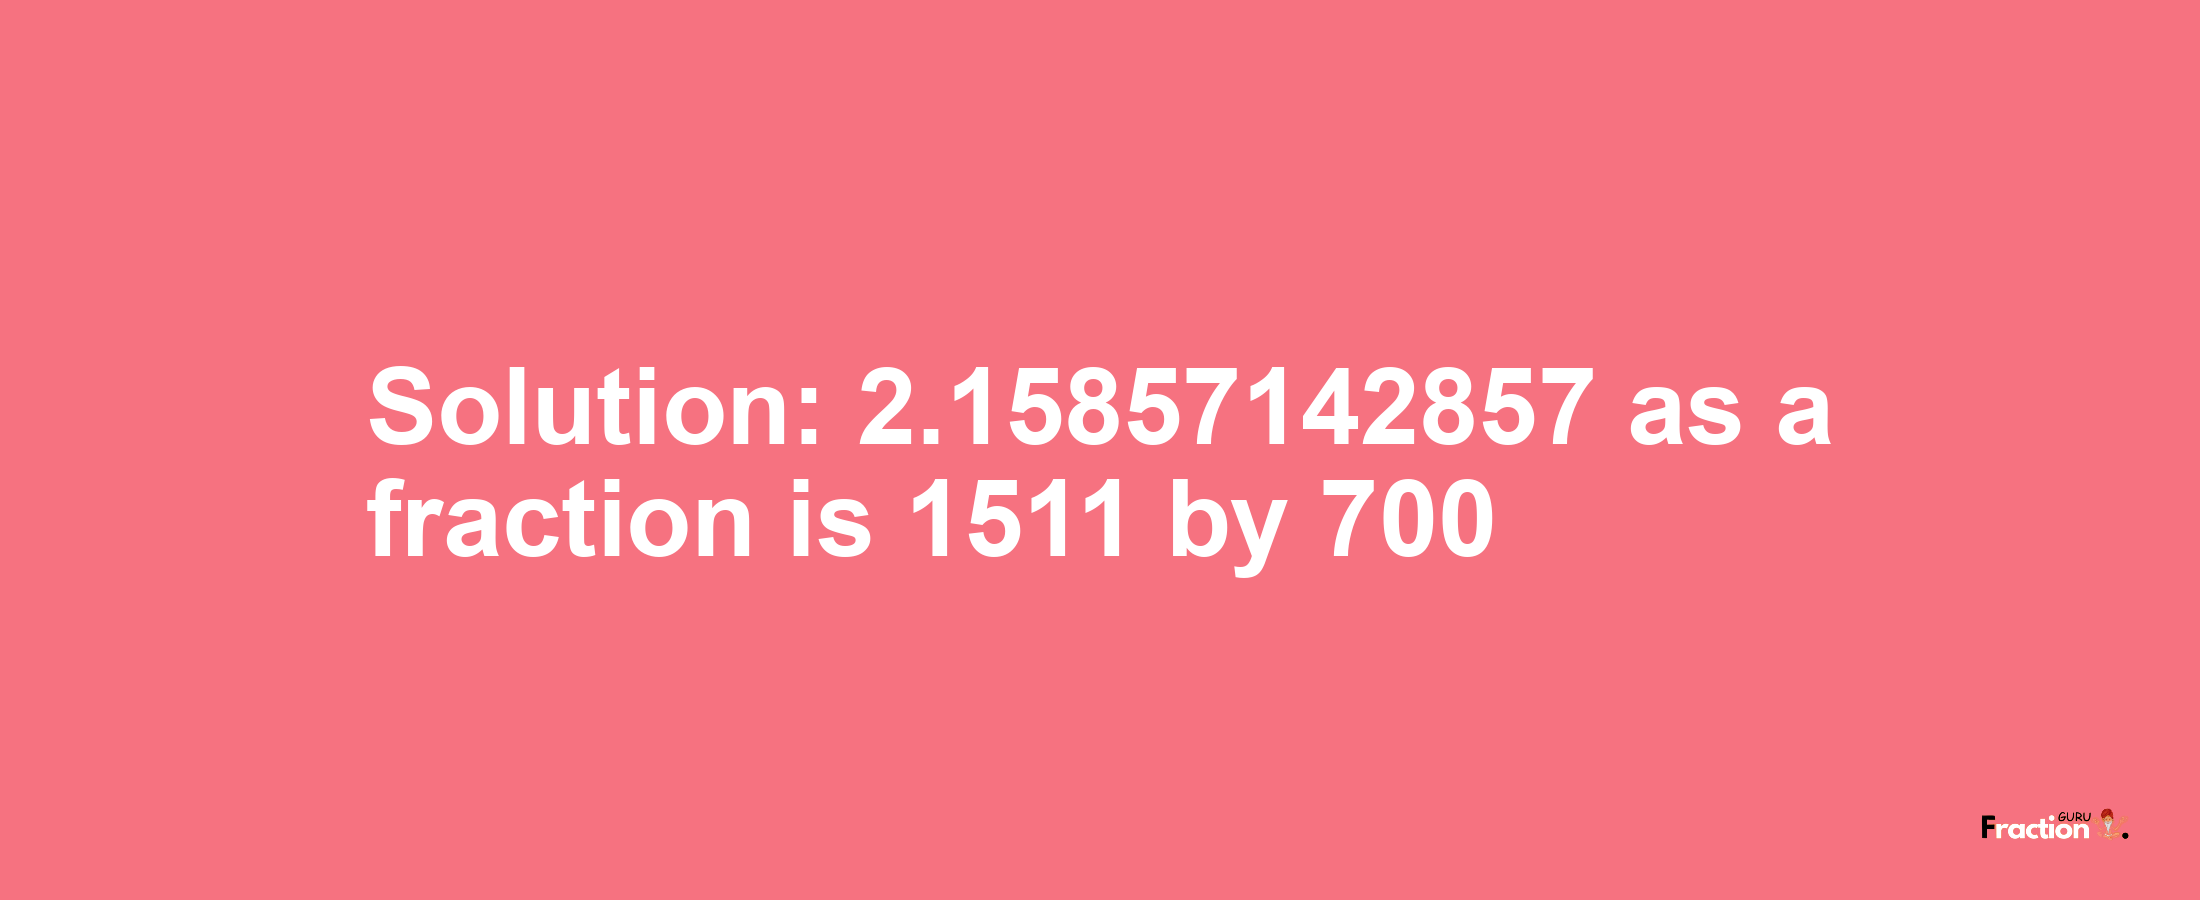 Solution:2.15857142857 as a fraction is 1511/700